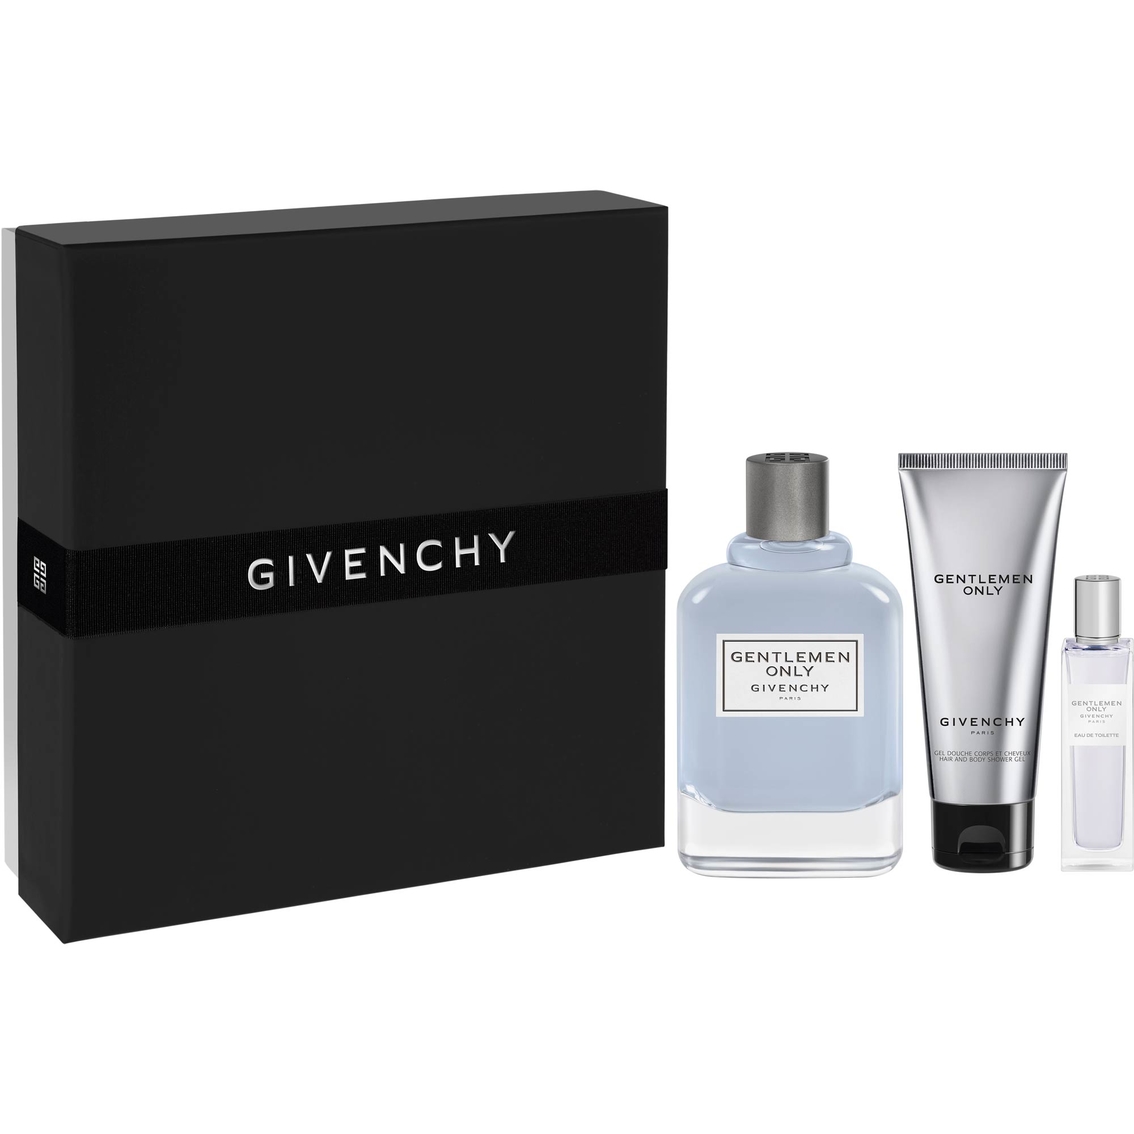 Givenchy Gentlemen Only Holiday 2018 Fragrance Set | Gifts Sets For Him ...